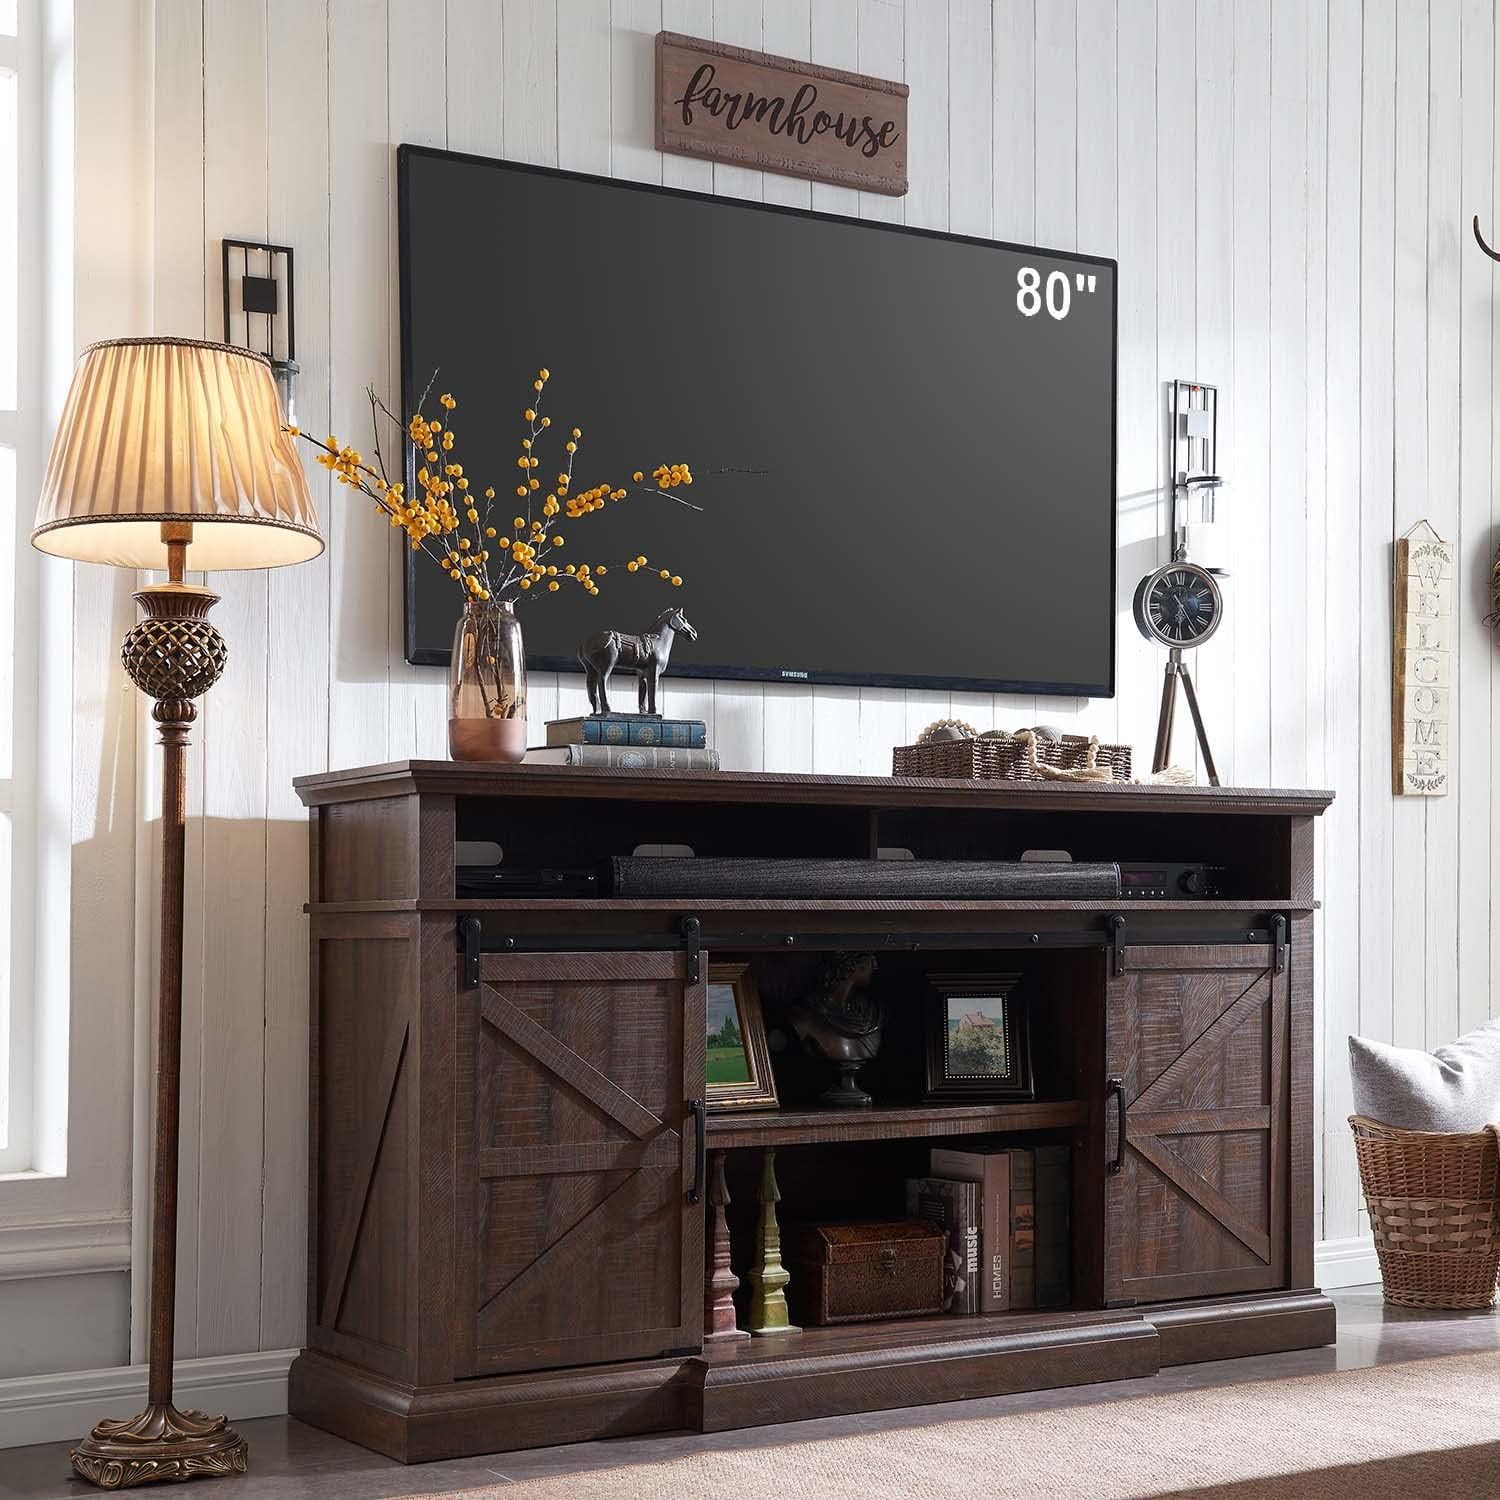 Sincido Farmhouse Tv Stand For 80 Inch Tvs, 39" Tall Entertainment Center  W/double Sliding Barn Door, Large Media Console Cabinet W/soundbar &  Adjustable Shelves For Living Room, 70inch, Brown – Walmart With Regard To Farmhouse Tv Stands For 70 Inch Tv (Photo 2 of 15)